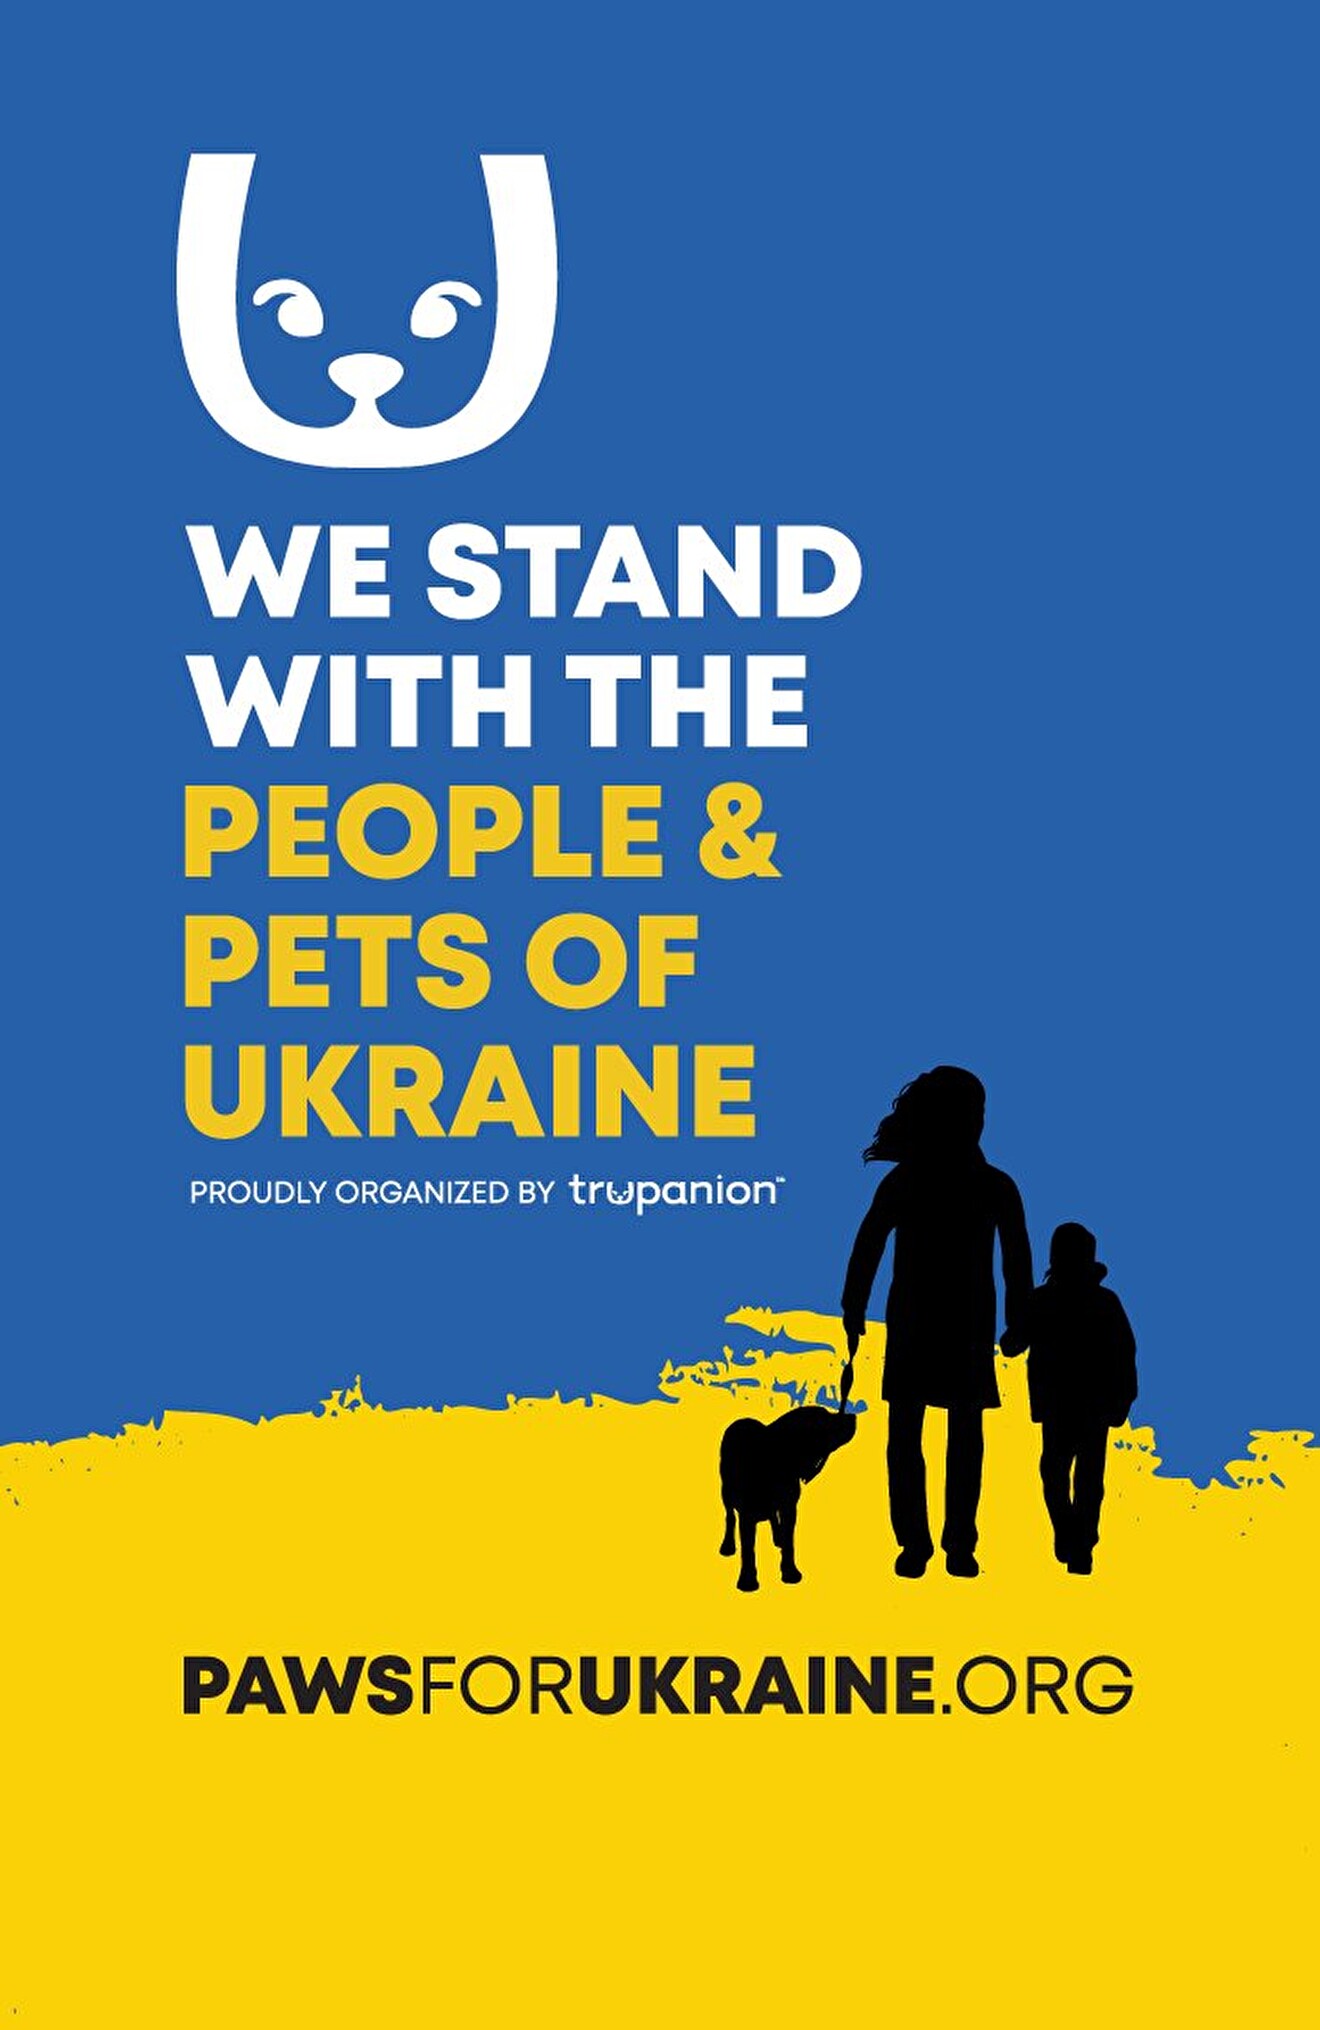 We stand with the people & pets of Ukraine